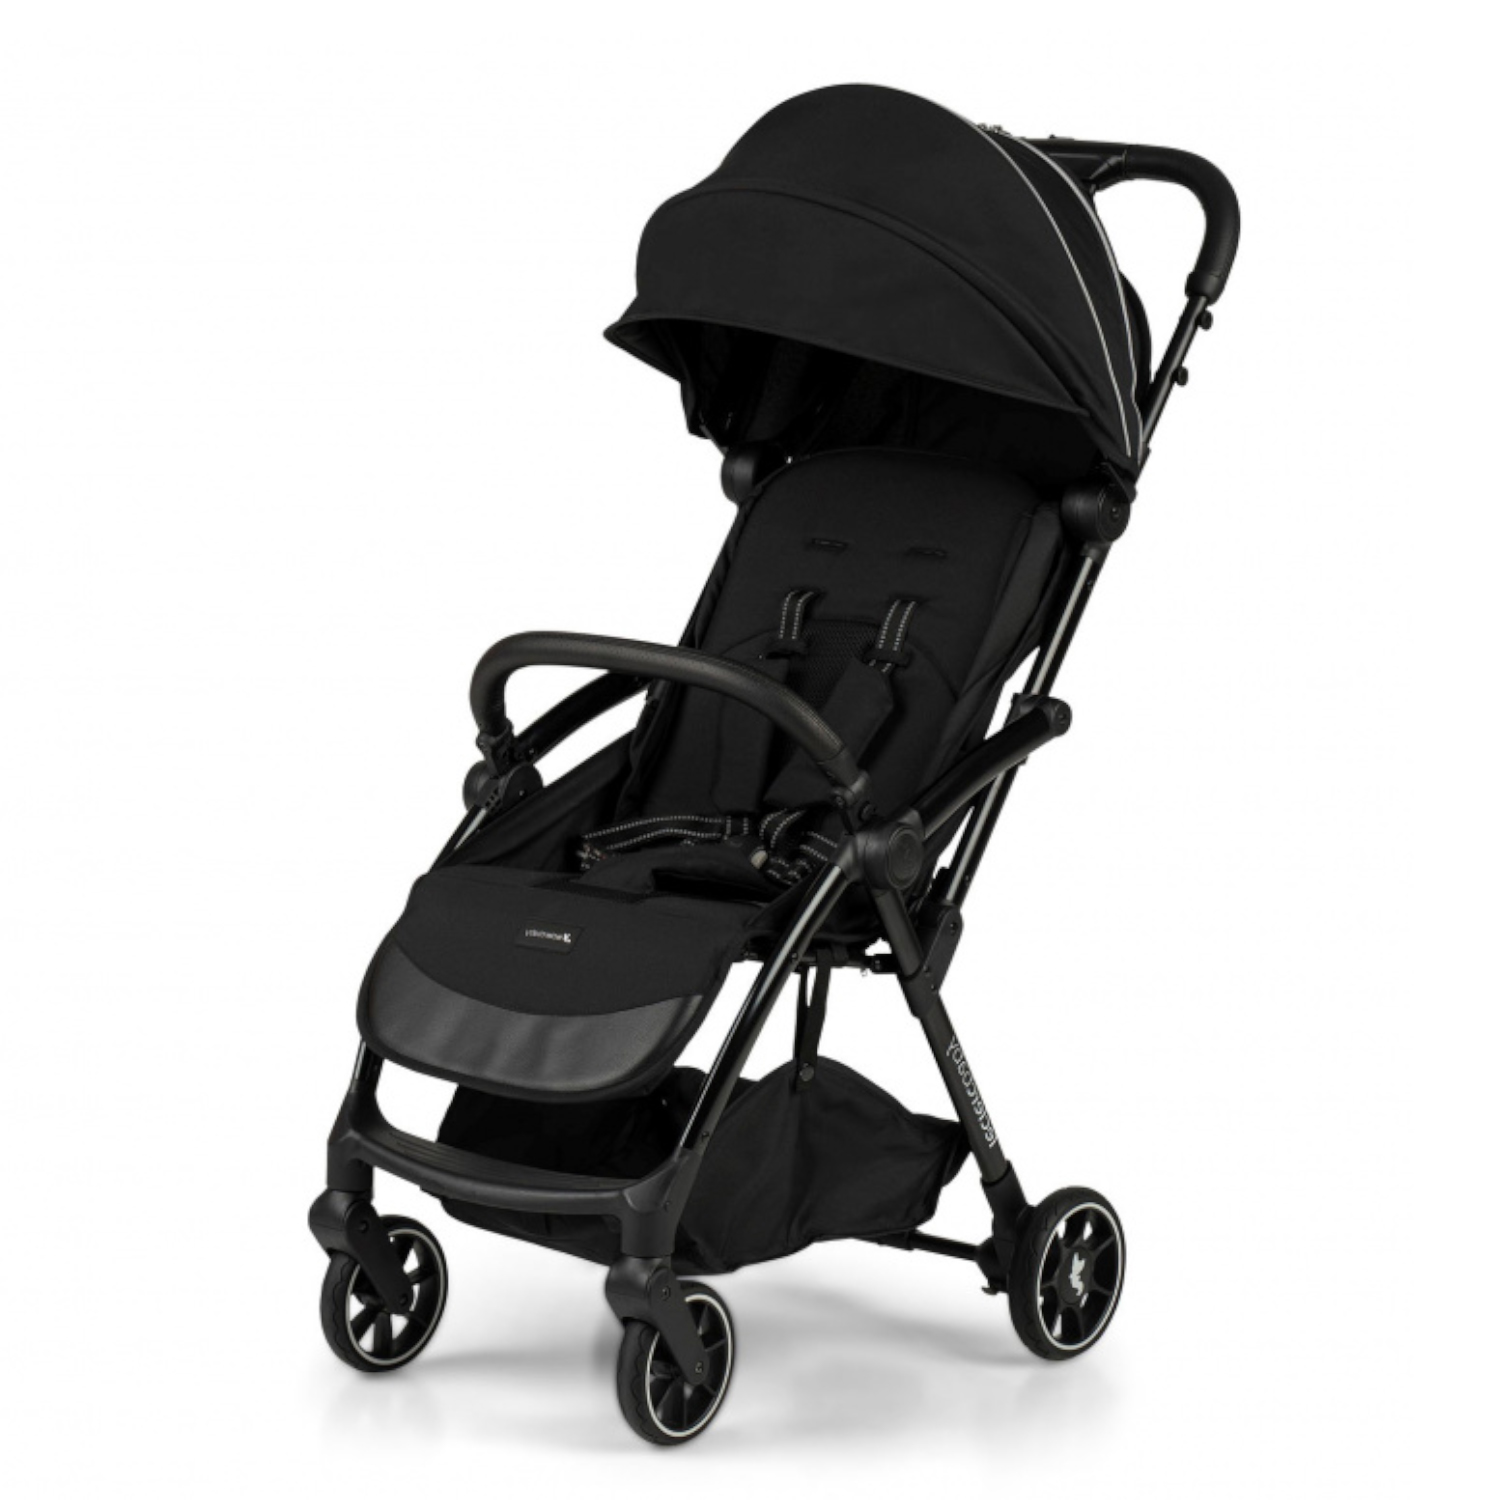 Leclerc Baby Прогулочная коляска Influencer Air, Piano Black Leclerc Baby